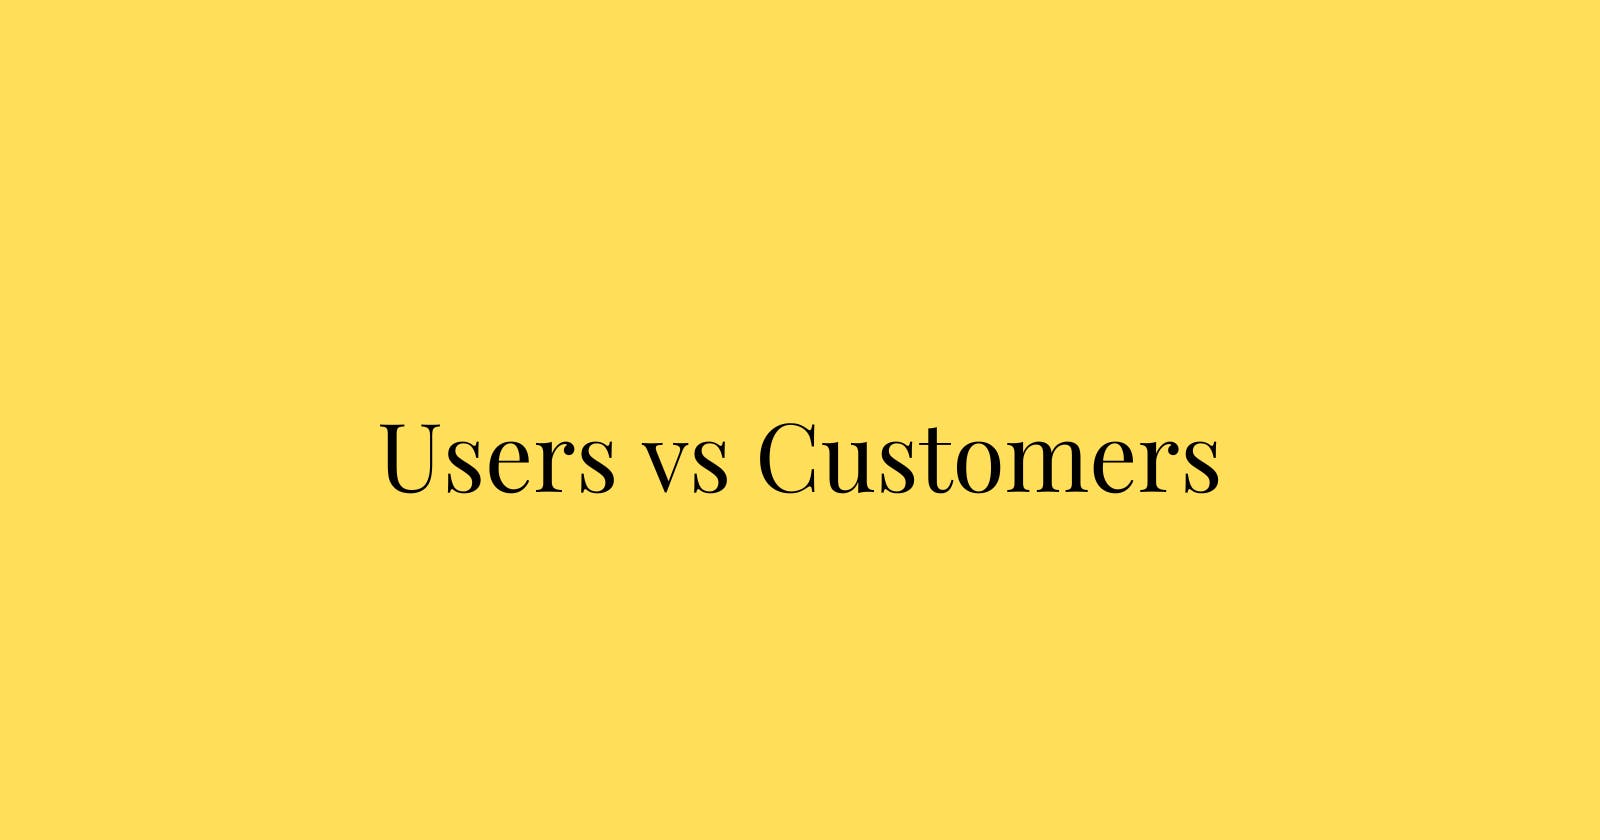 What's the difference between a User and a Customer?